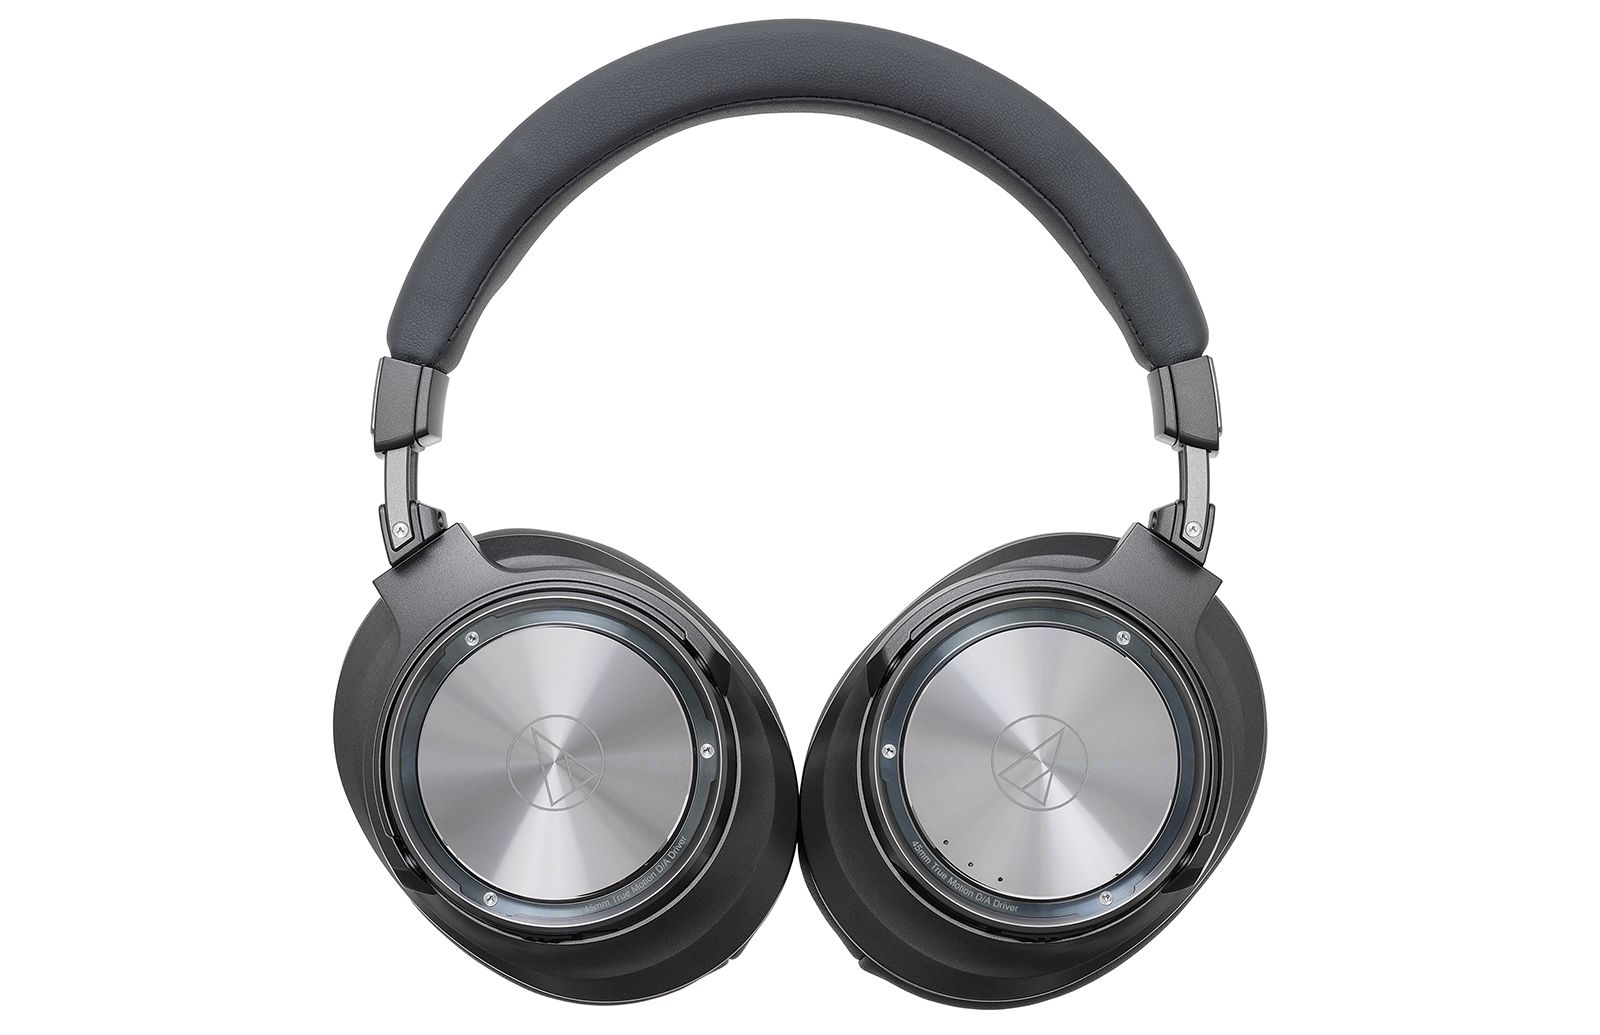 ditching the dac audio technica dsr9bt bluetooth headphones go all digital with pure digital drive tech image 1